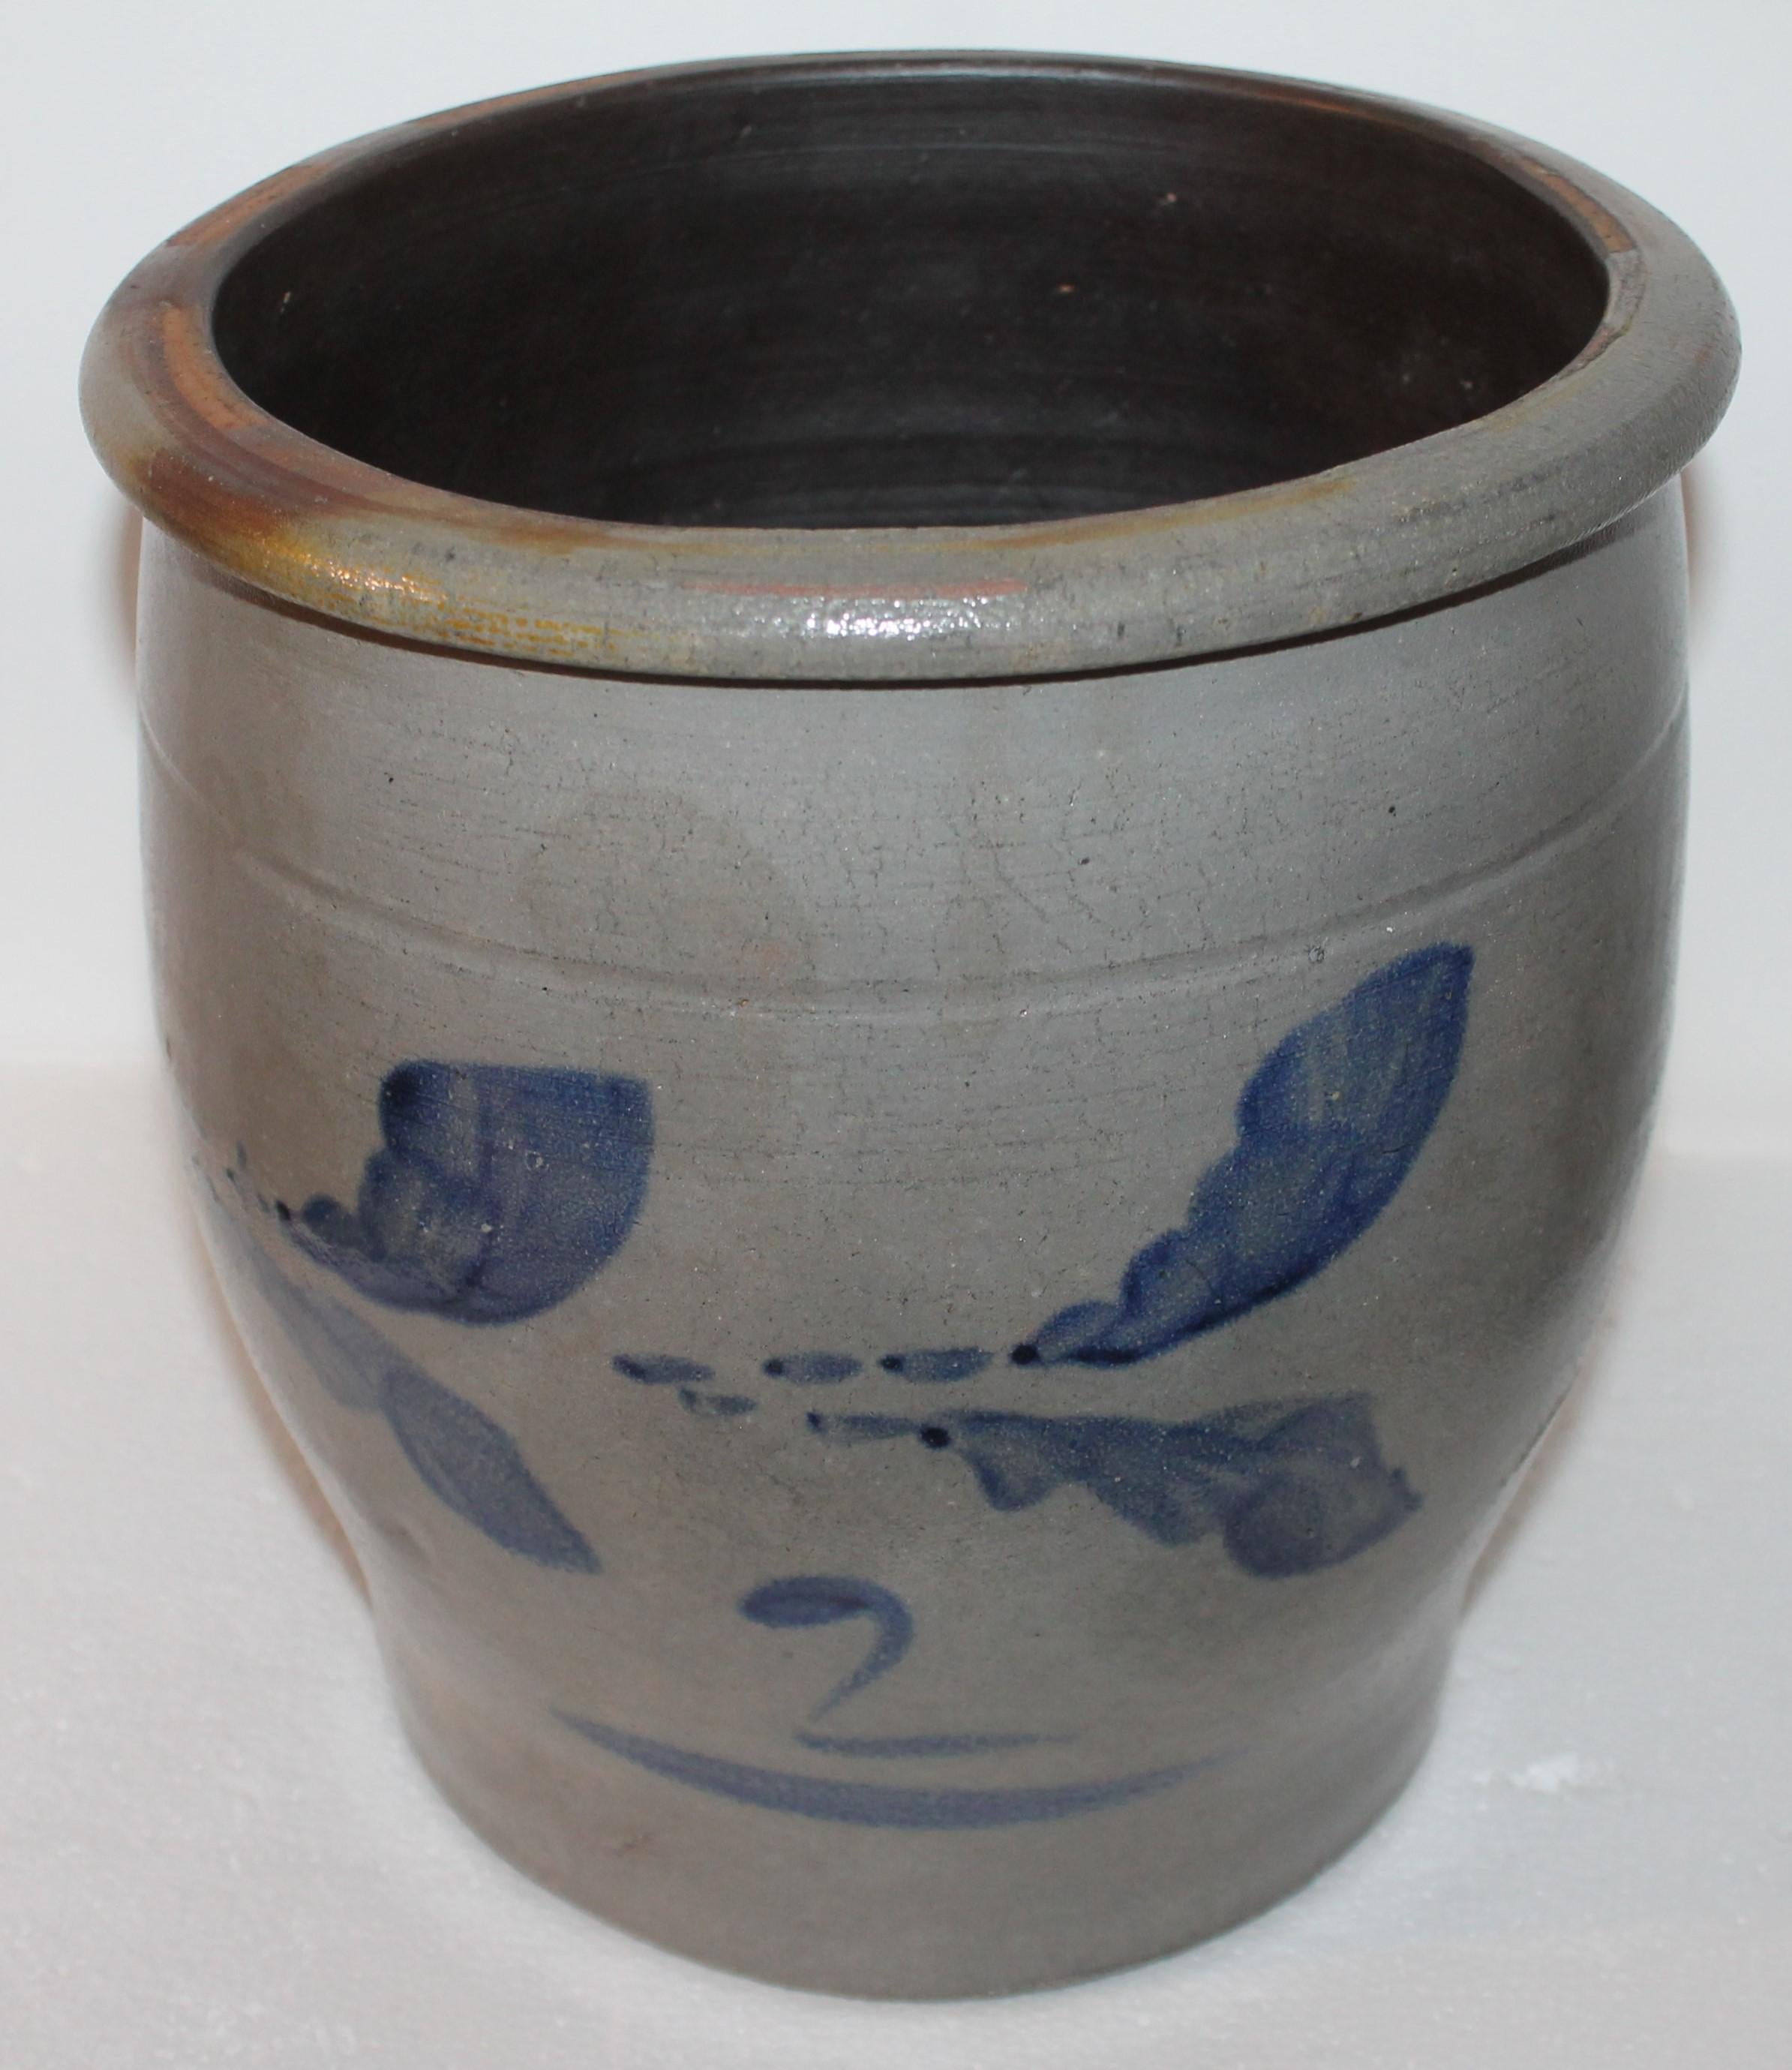 This fine blue decorated salt glaze crock in fine condition. It has stripes and a blue 2 on the front face.